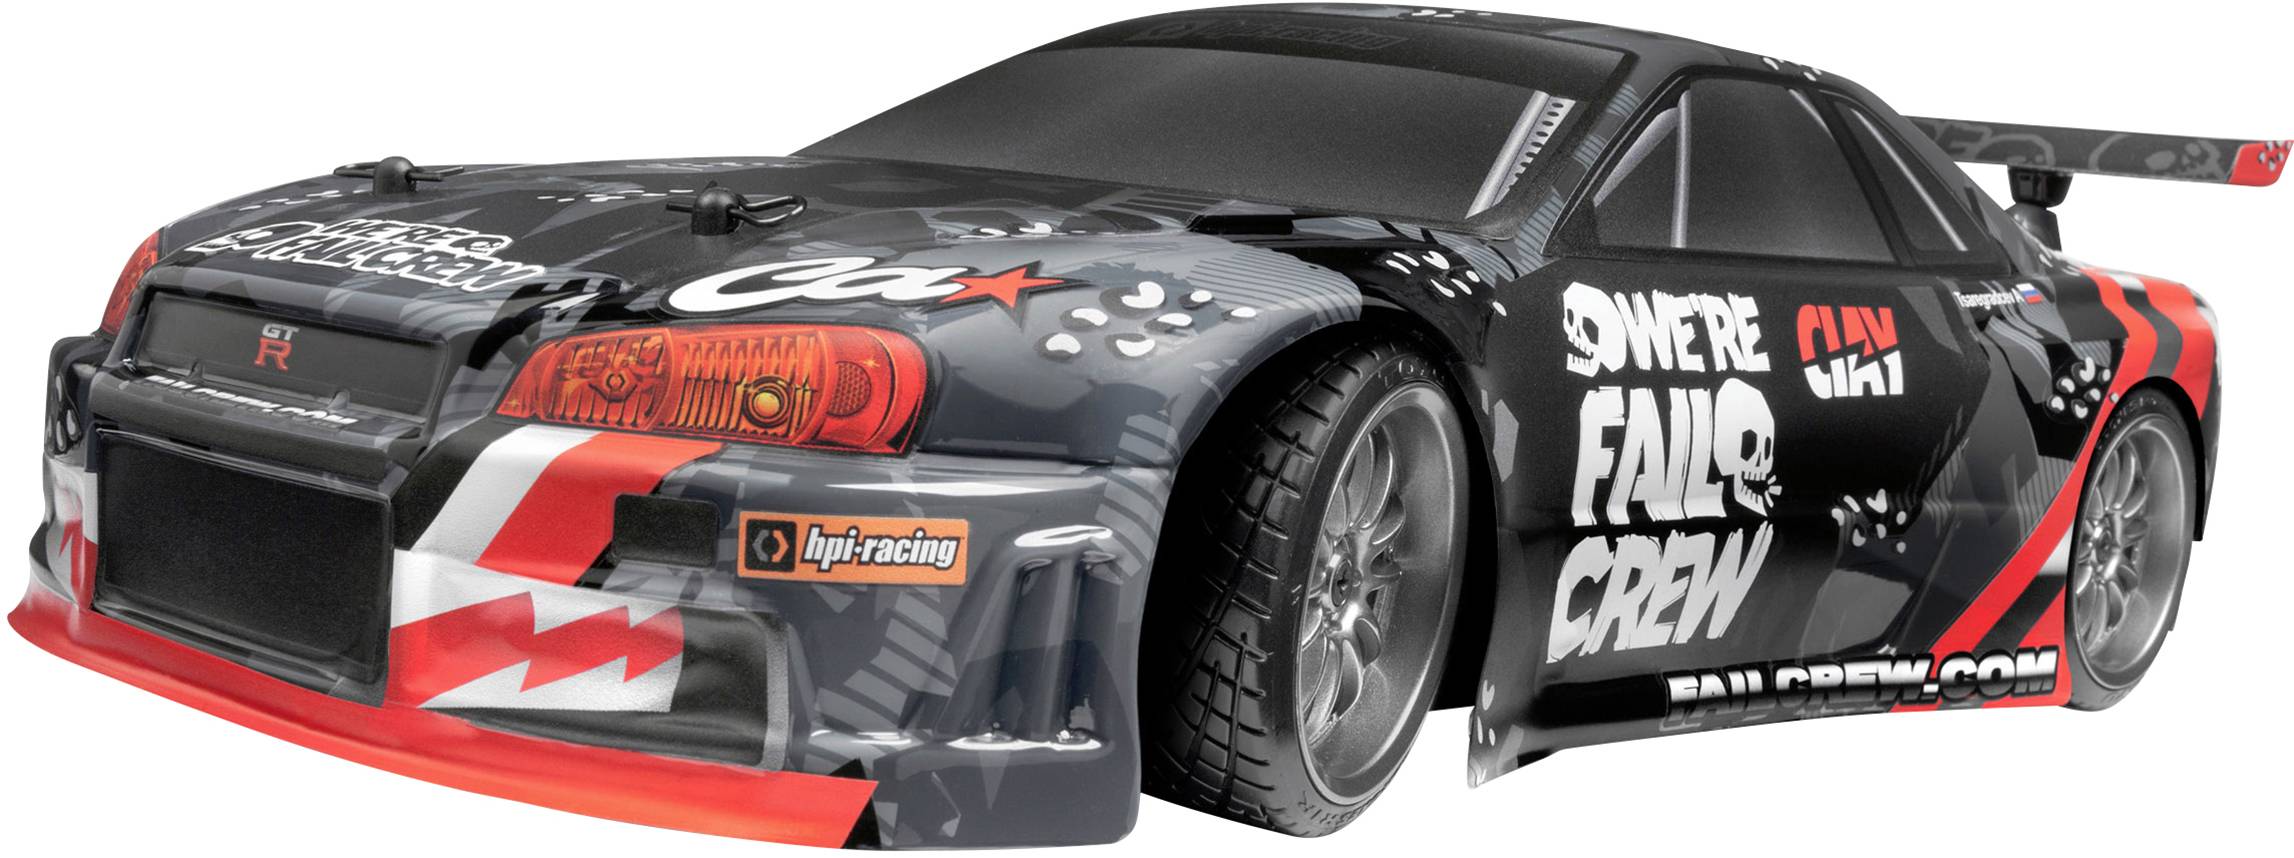 HPI Racing E10 Drift Nissan Skyline R34 GT-R Brushed 1:10 RC model car Electric Road version 4WD 100% RtR 2,4 GHz Incl Conrad.com